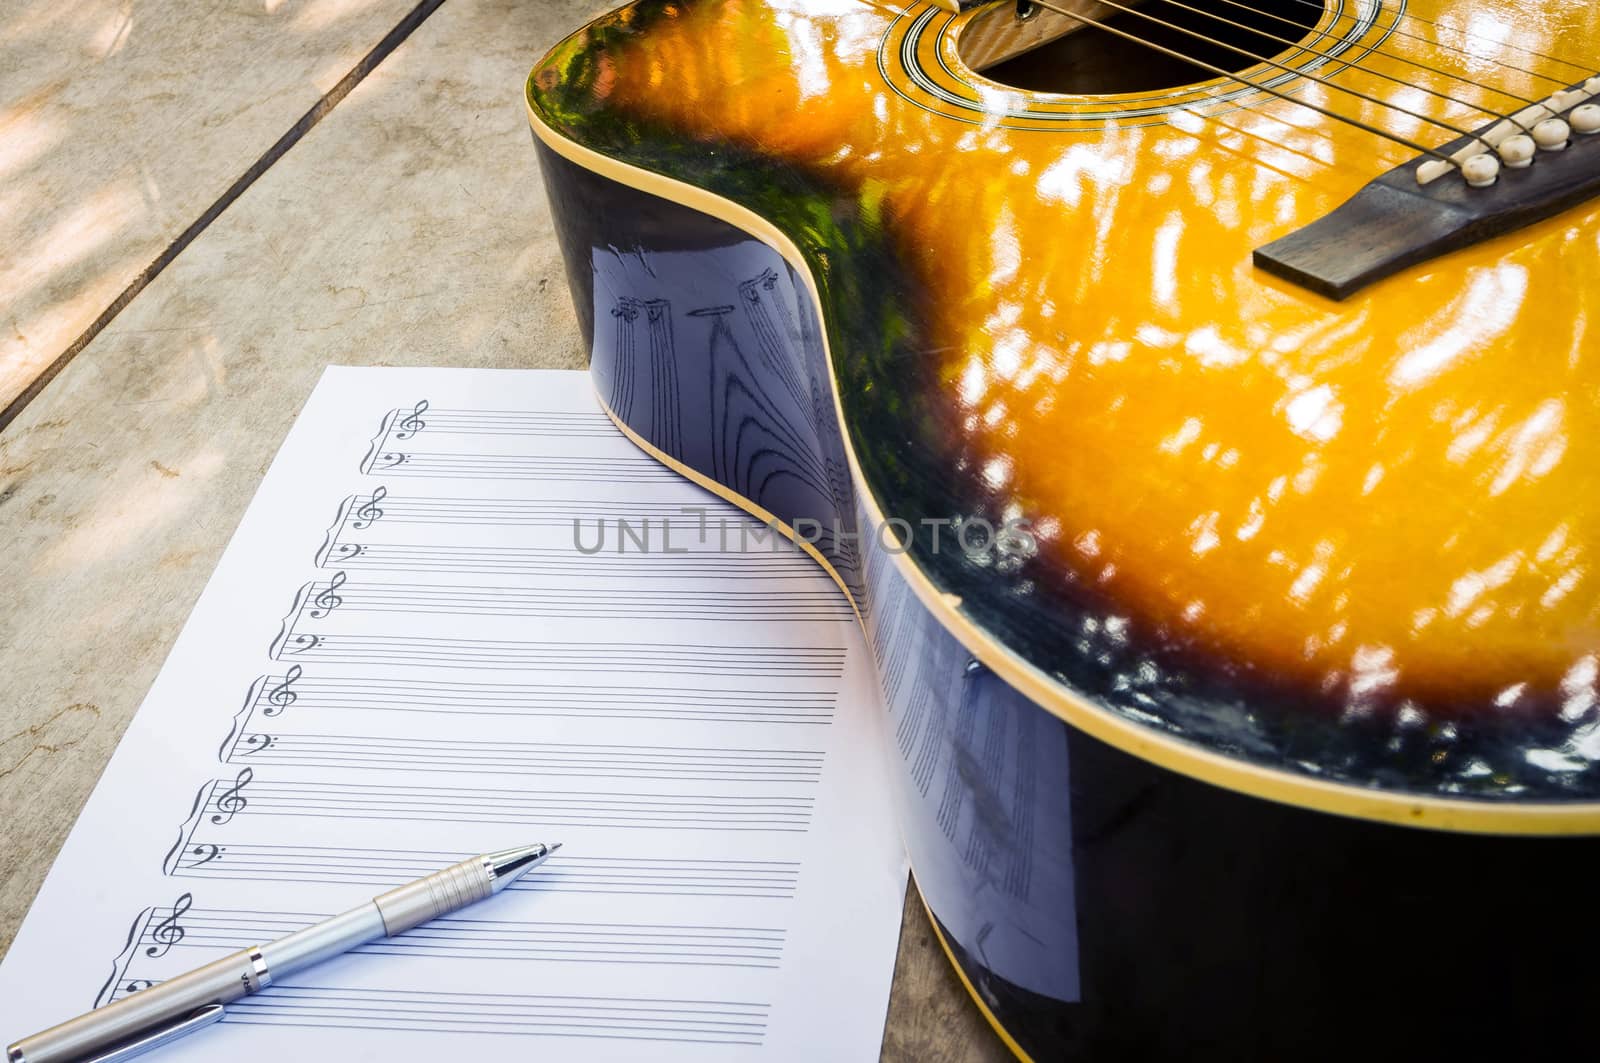 guitar and blank notebook with pen.